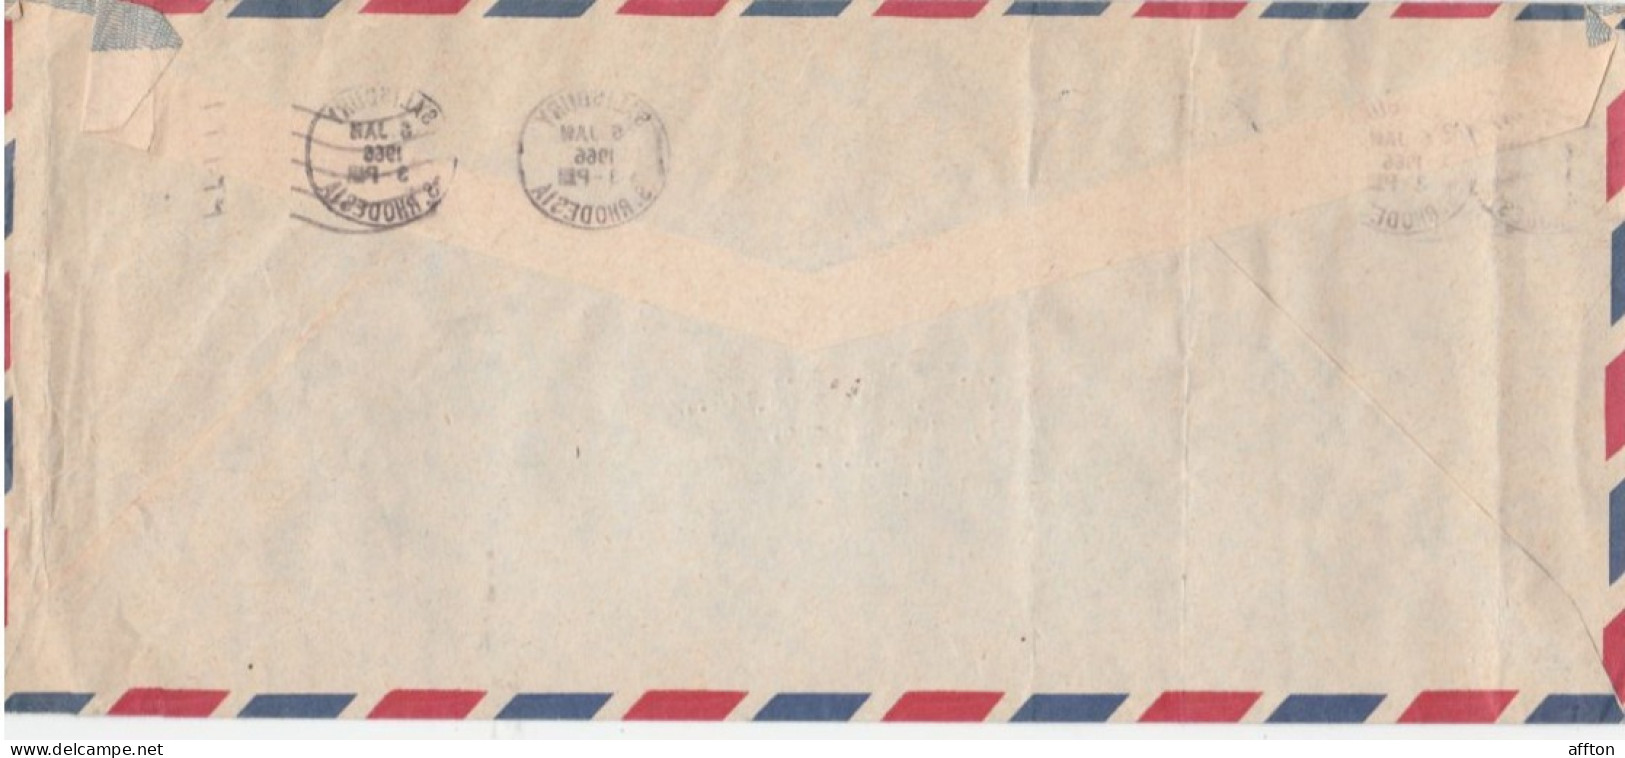 Rhodesia 1966 Cover Mailed Stamps Not Valid Postage Due - Rhodesia (1964-1980)